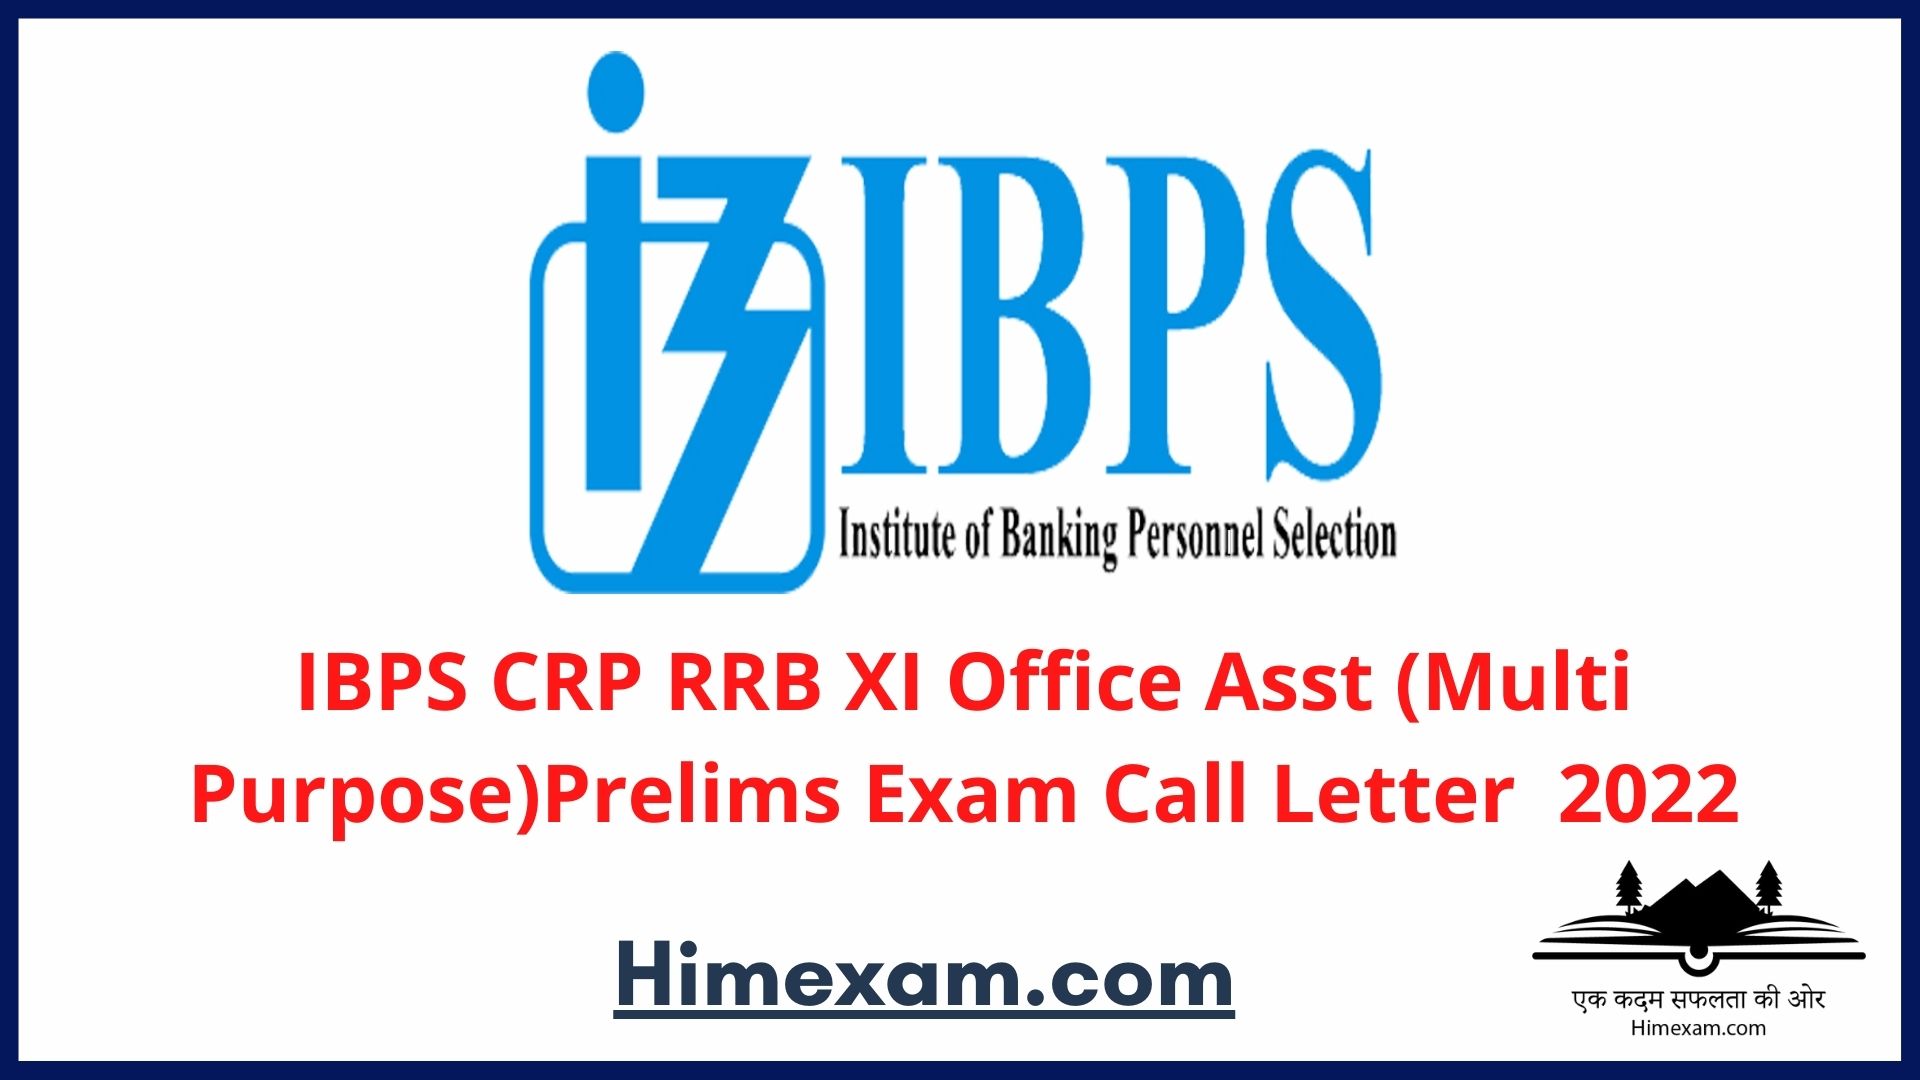 IBPS CRP RRB XI Office Asst (Multi Purpose)Prelims Exam Call Letter  2022